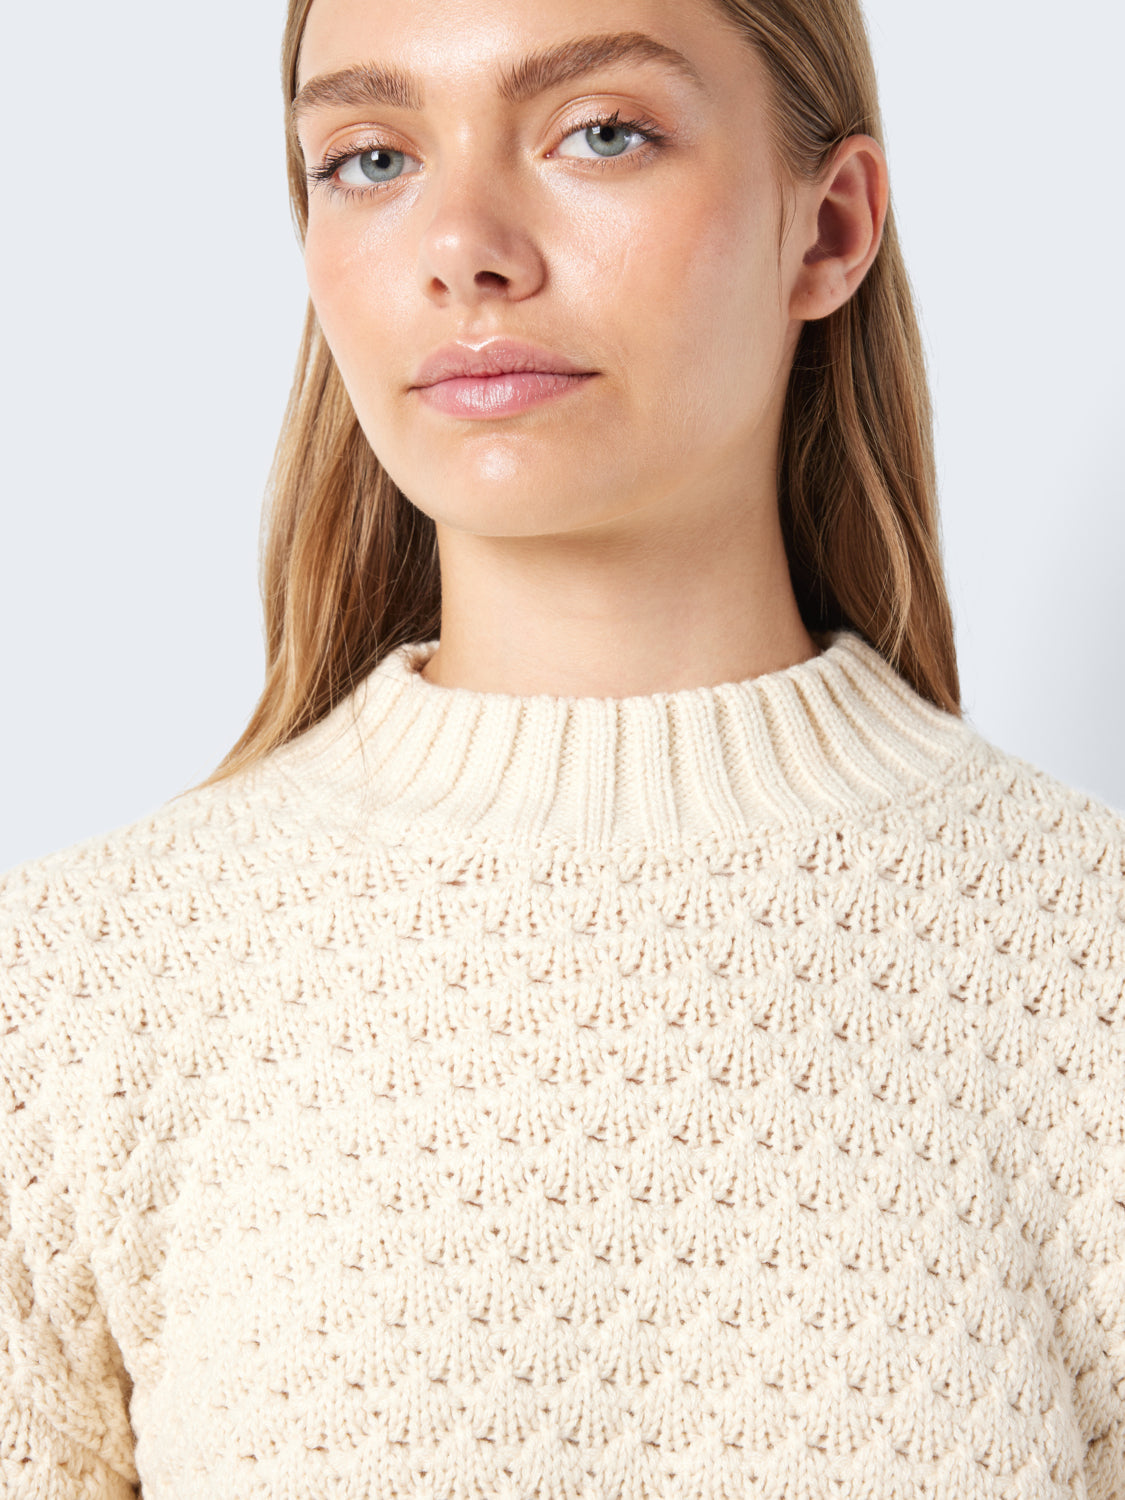 NMBILLY Pullover - Pearled Ivory